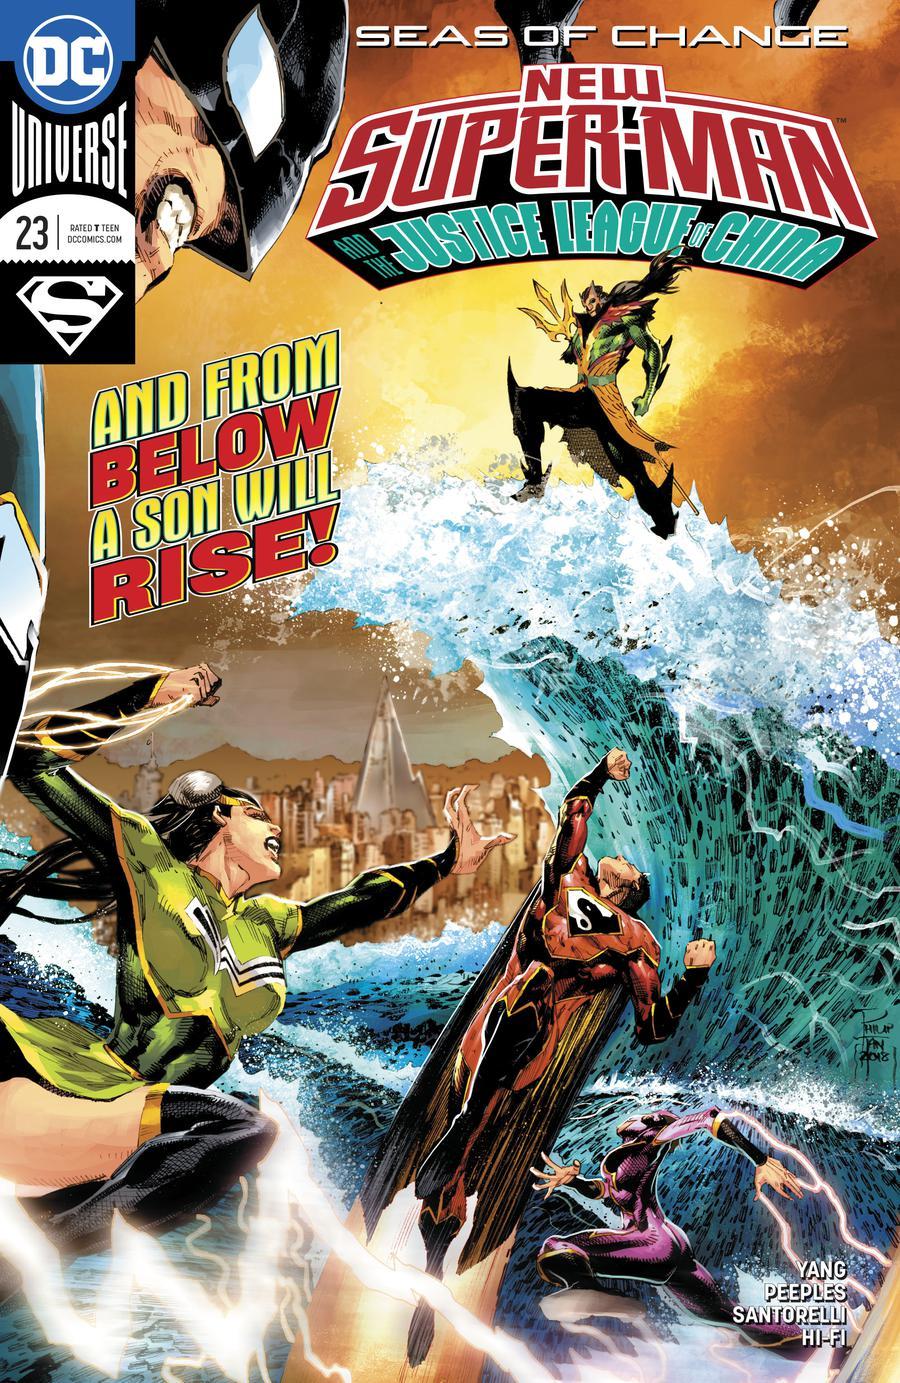 New Super-Man And The Justice League Of China Vol. 1 #23